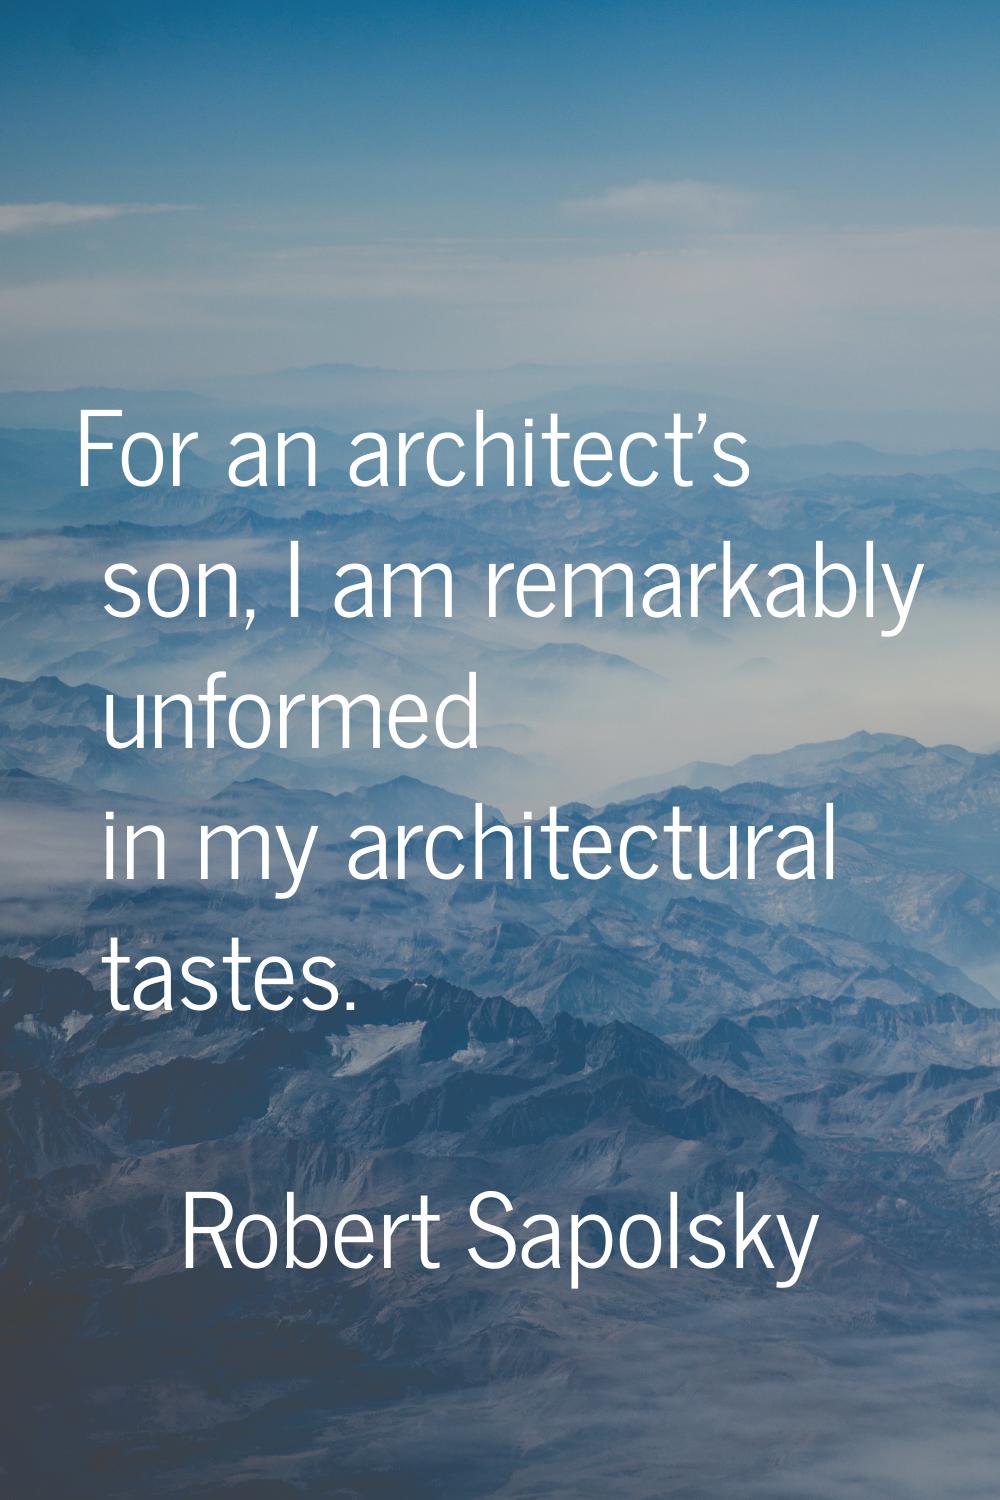 For an architect's son, I am remarkably unformed in my architectural tastes.